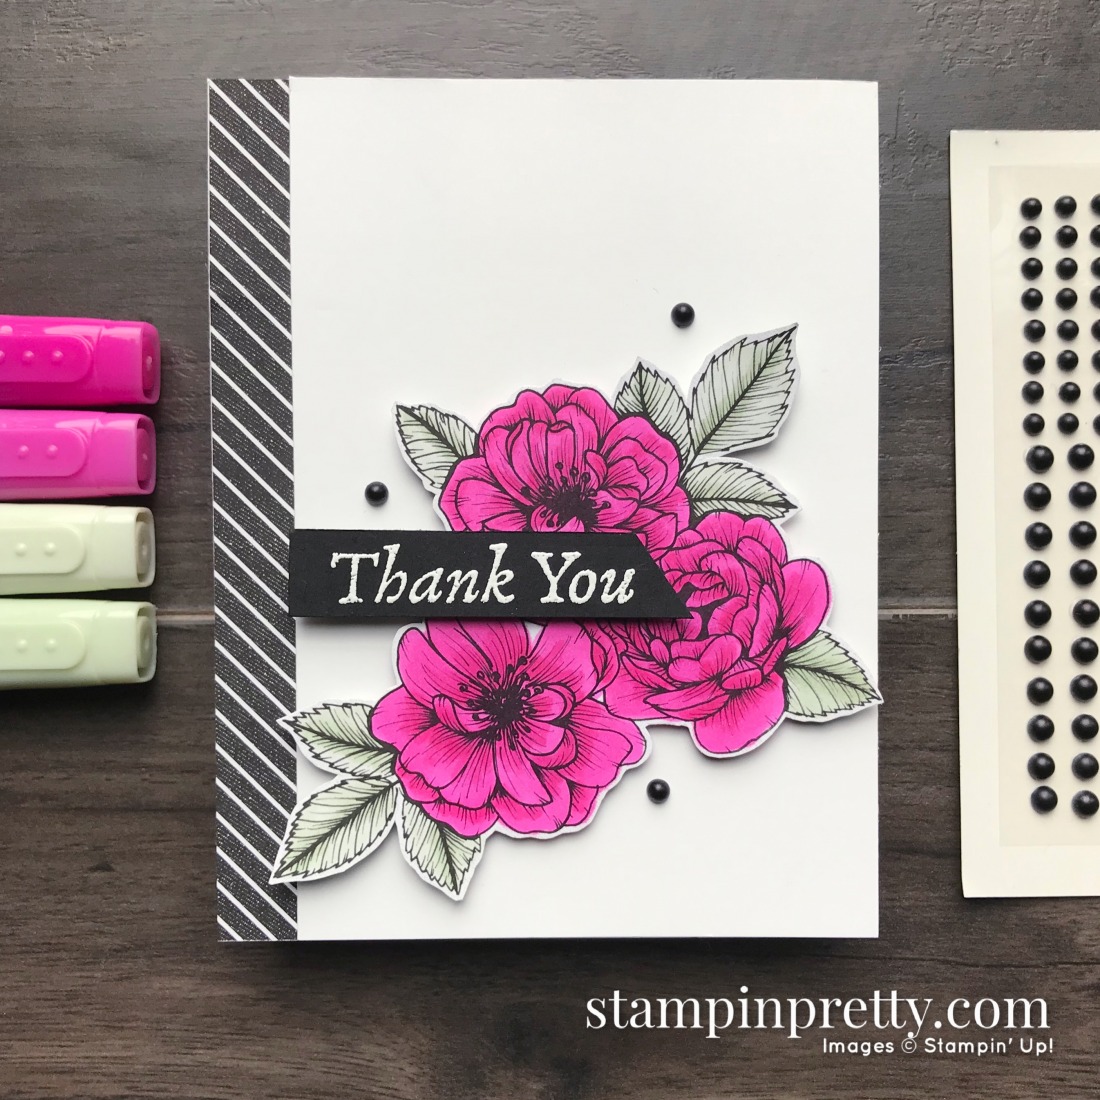 SNEAK PEEK! Create this card using the True Love Designer Series Paper and Matte Black Dots by Stampin' Up! Thank You Card by Mary Fish, Stampin' Pretty